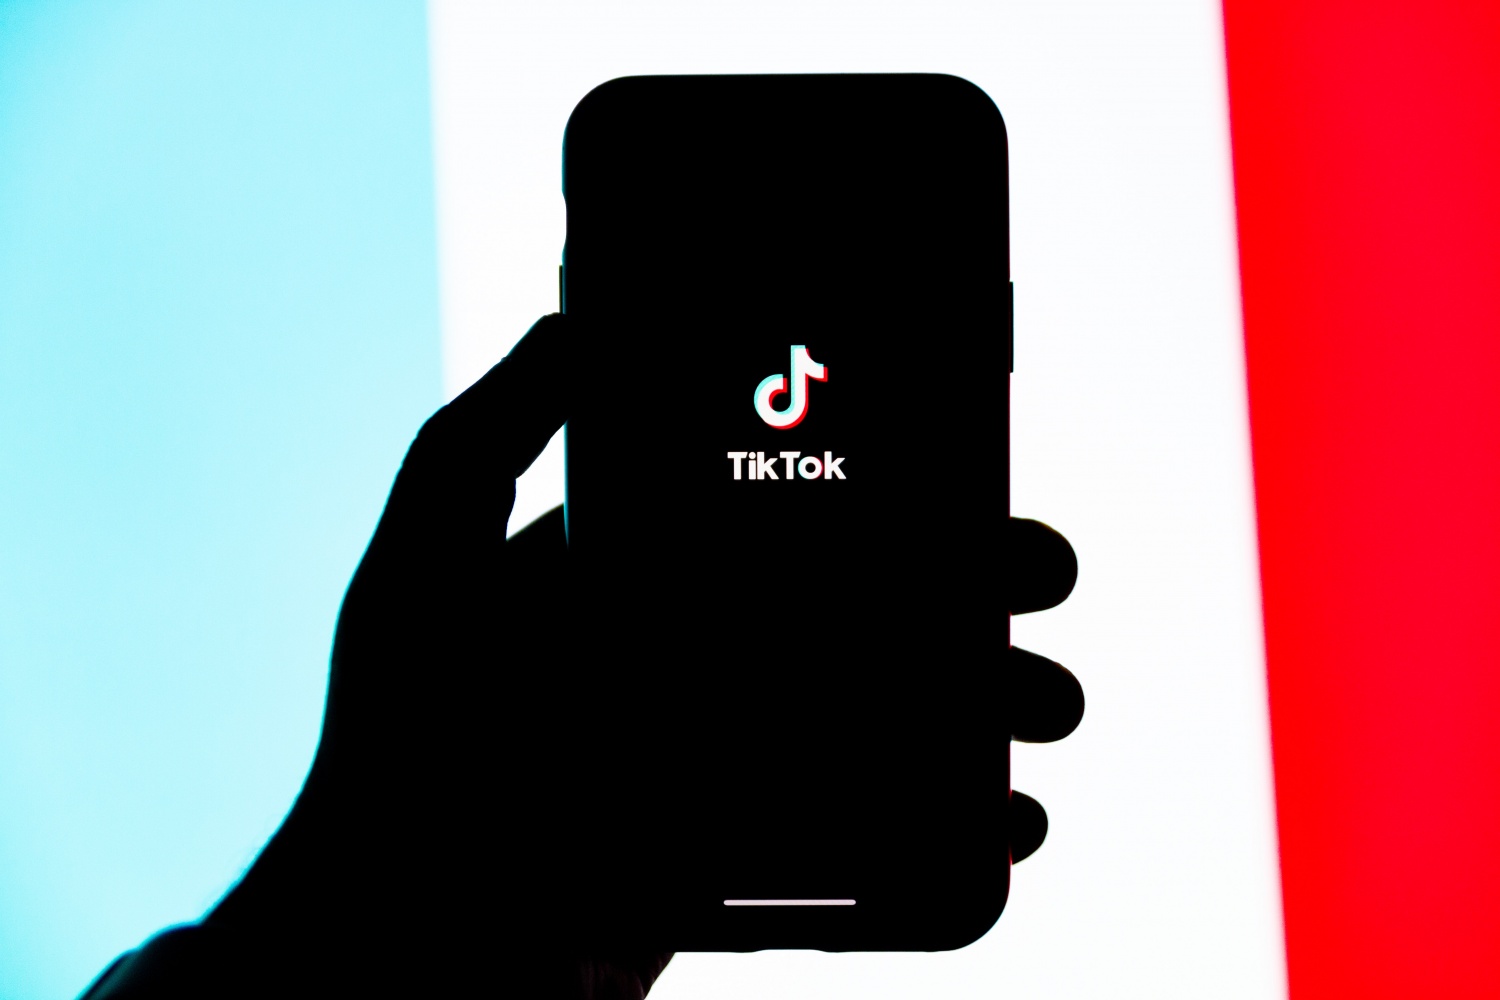 Ethically Questionable TikTok Trend Uses Strangers as Video Subjects